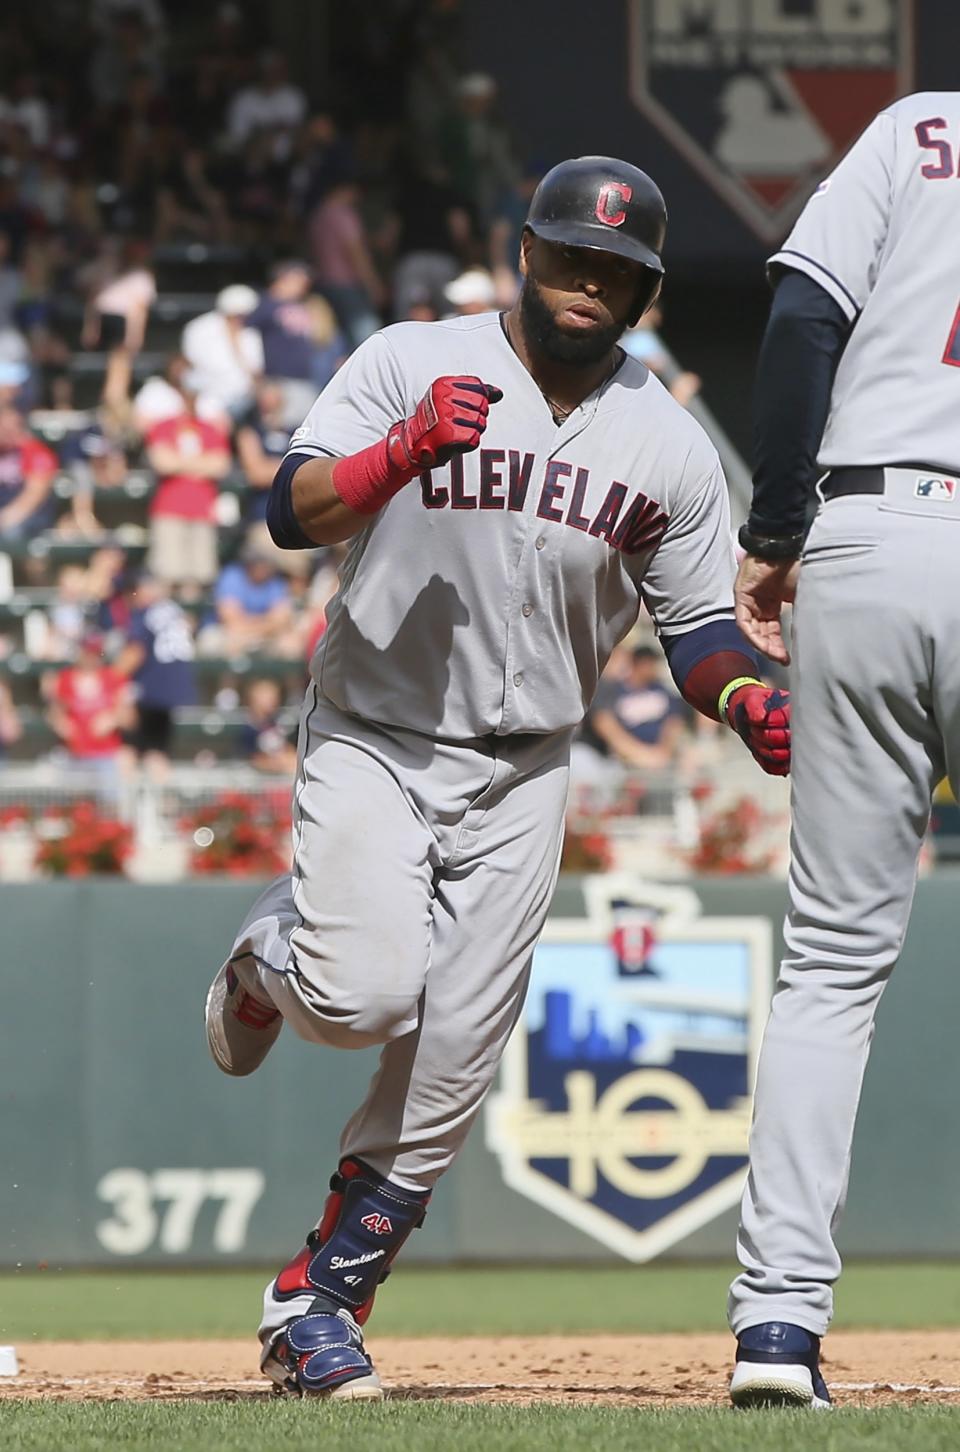 Cleveland Indians' Carlos Santana rounds third base on a grand slam off Minnesota Twins pitcher Taylor Rogers in the 10th inning of a baseball game Sunday, Aug. 11, 2019, in Minneapolis. The Indians won 7-3. (AP Photo/Jim Mone)